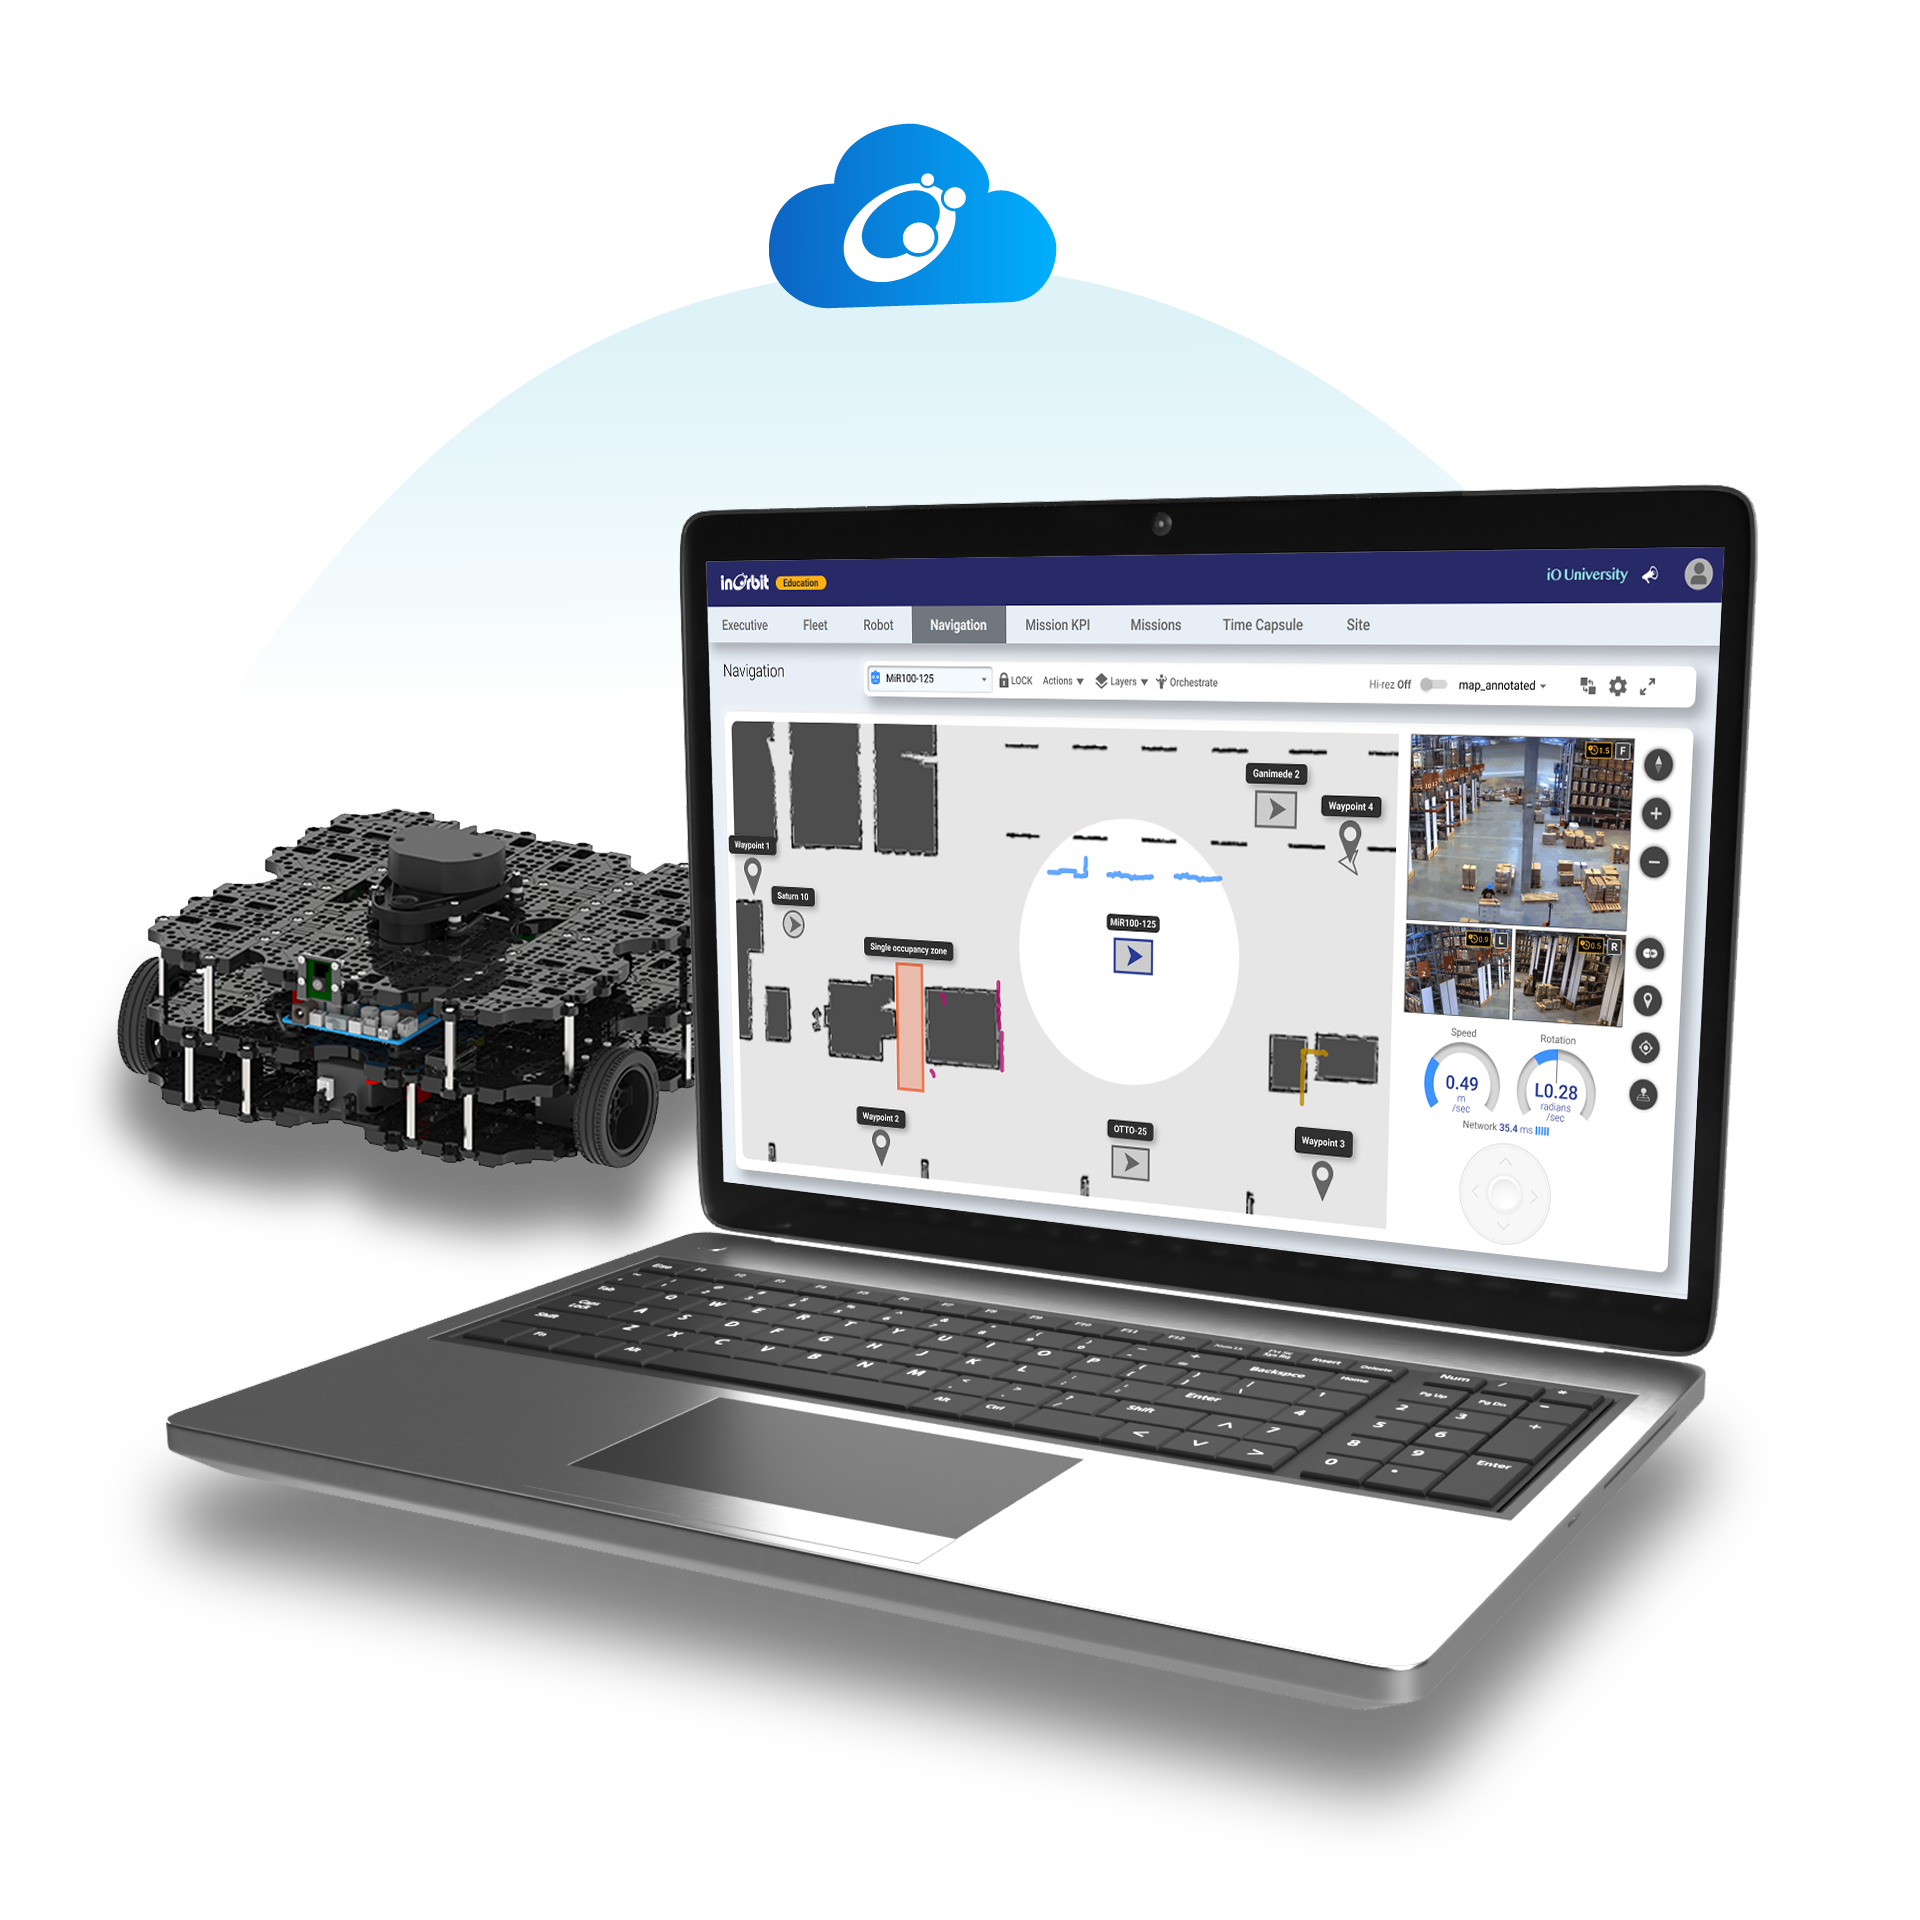 laptop-and-turtlebot-with-cloud